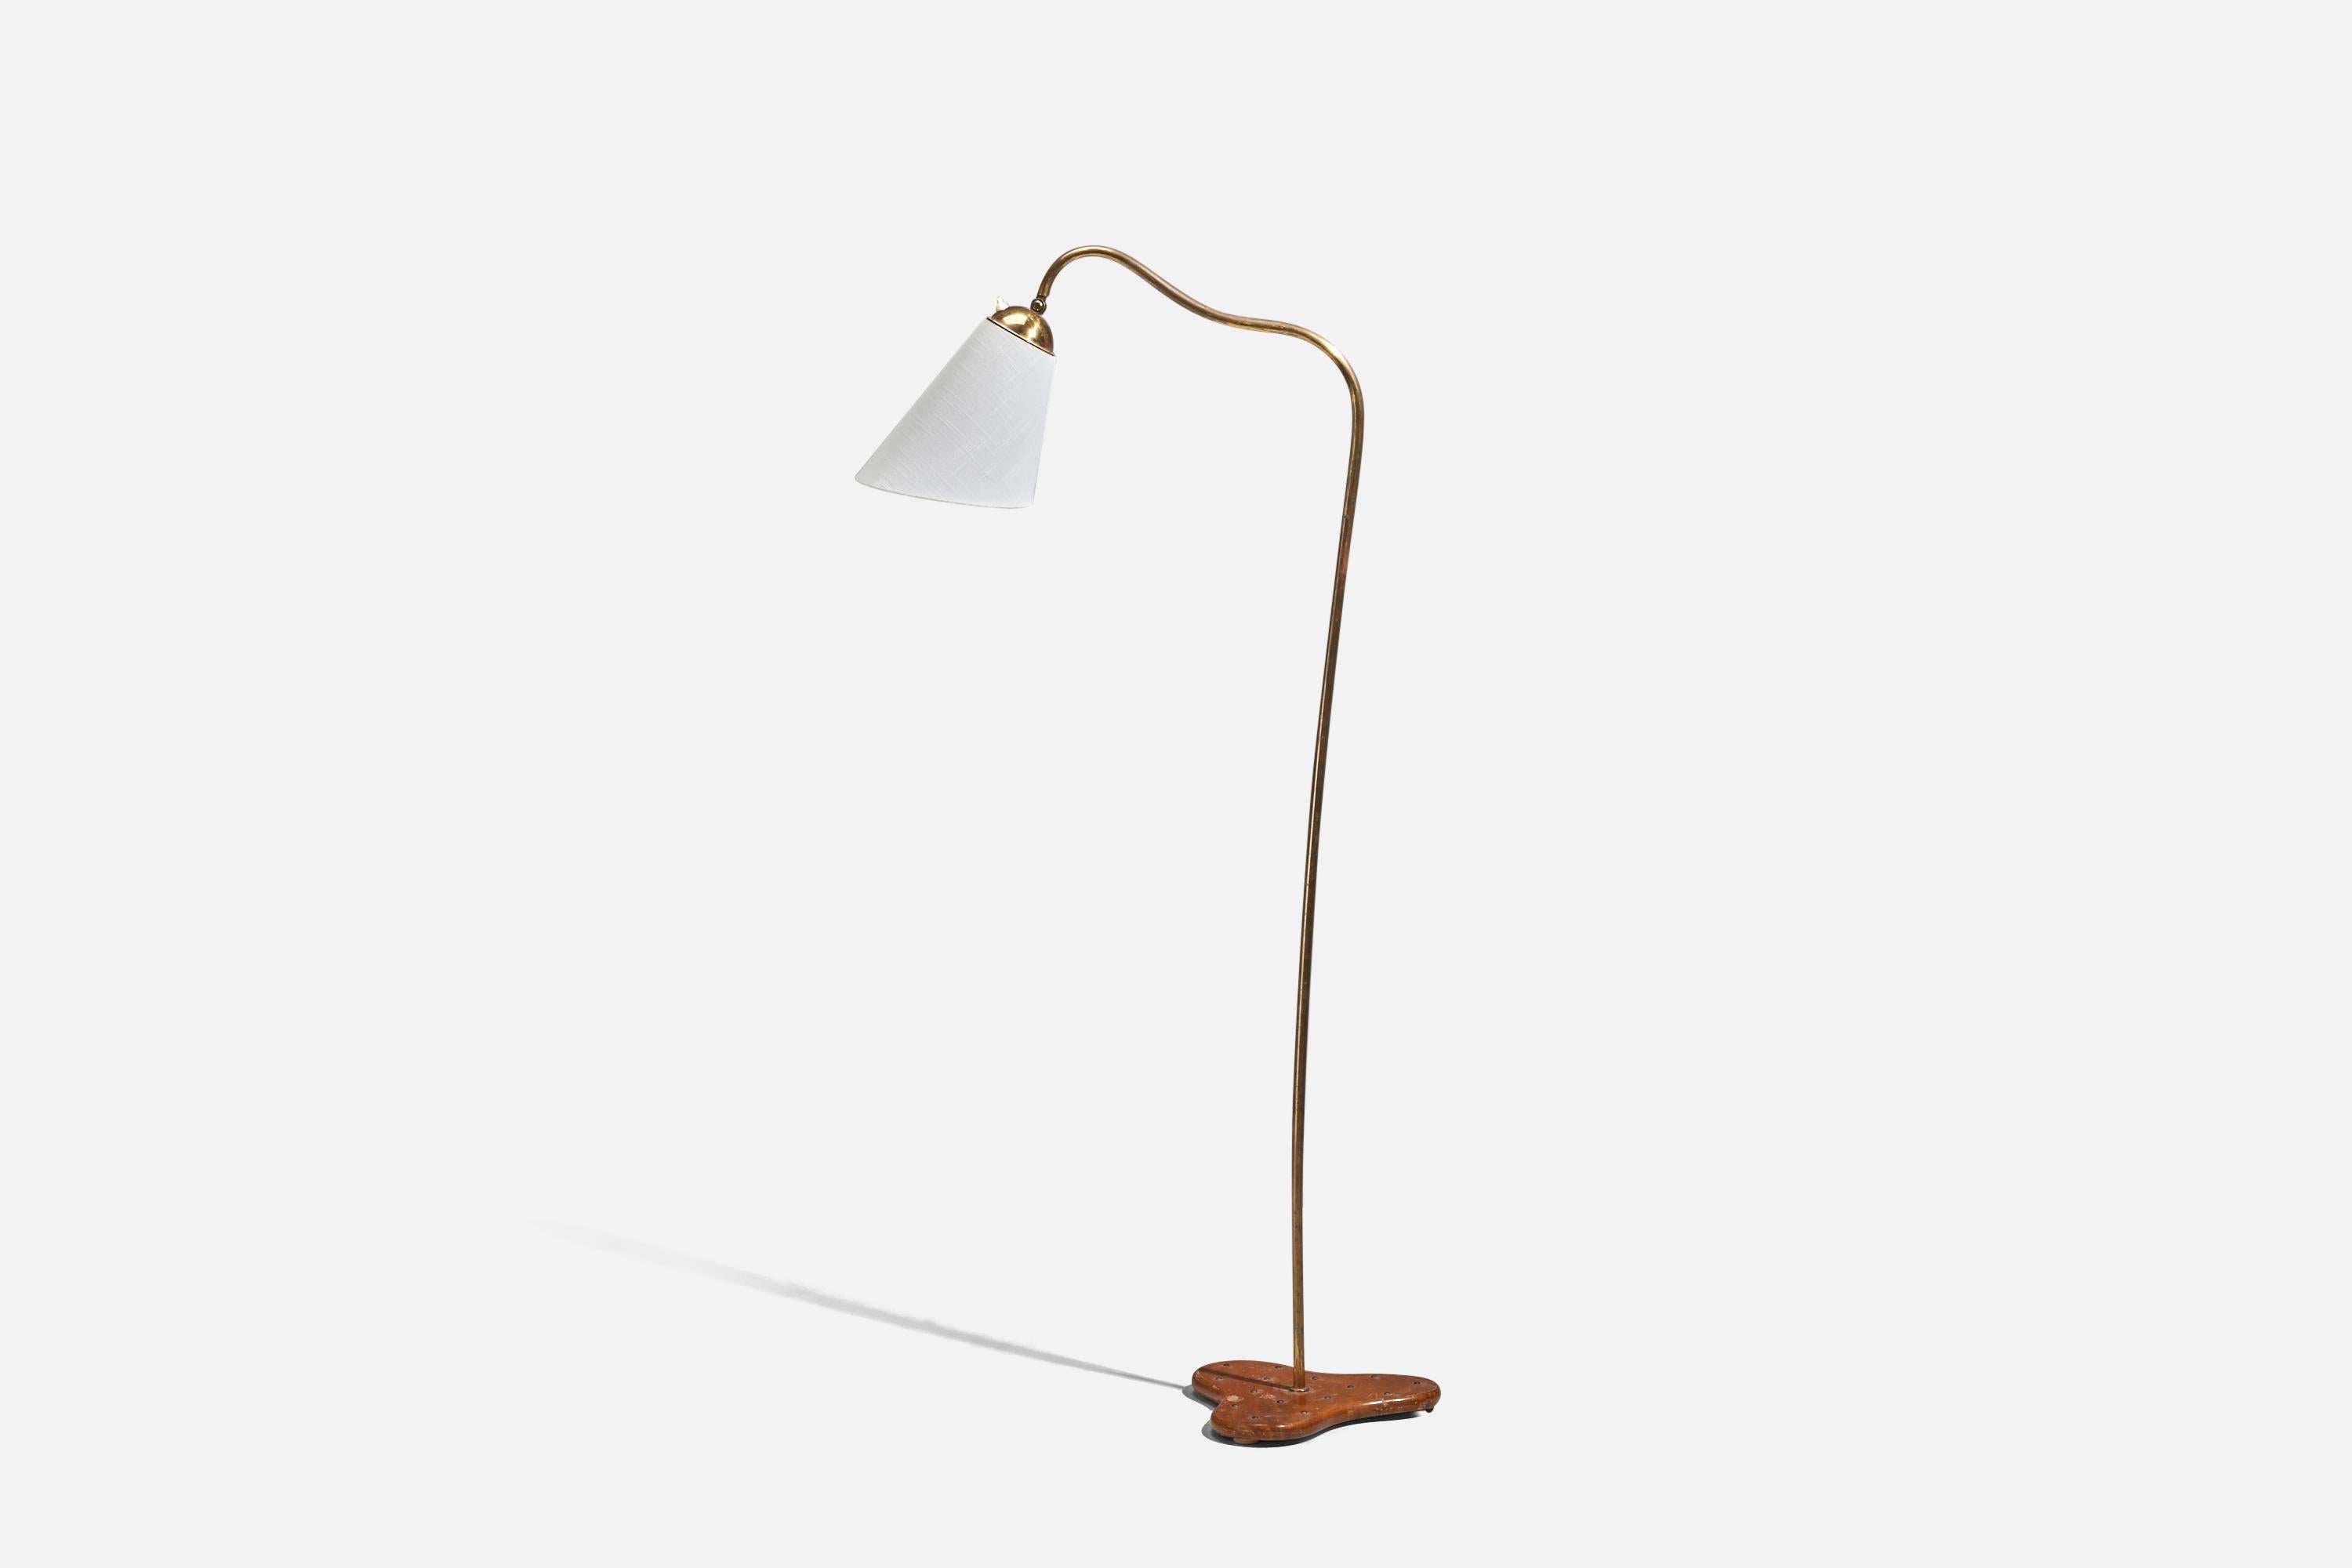 An adjustable, brass, wood and fabric floor lamp; design and production attributed to Böhlmarks, Sweden, 1930s.

Dimensions variable, measured as illustrated in first image.

Sold with Lampshade. Dimensions stated are of Floor Lamp with